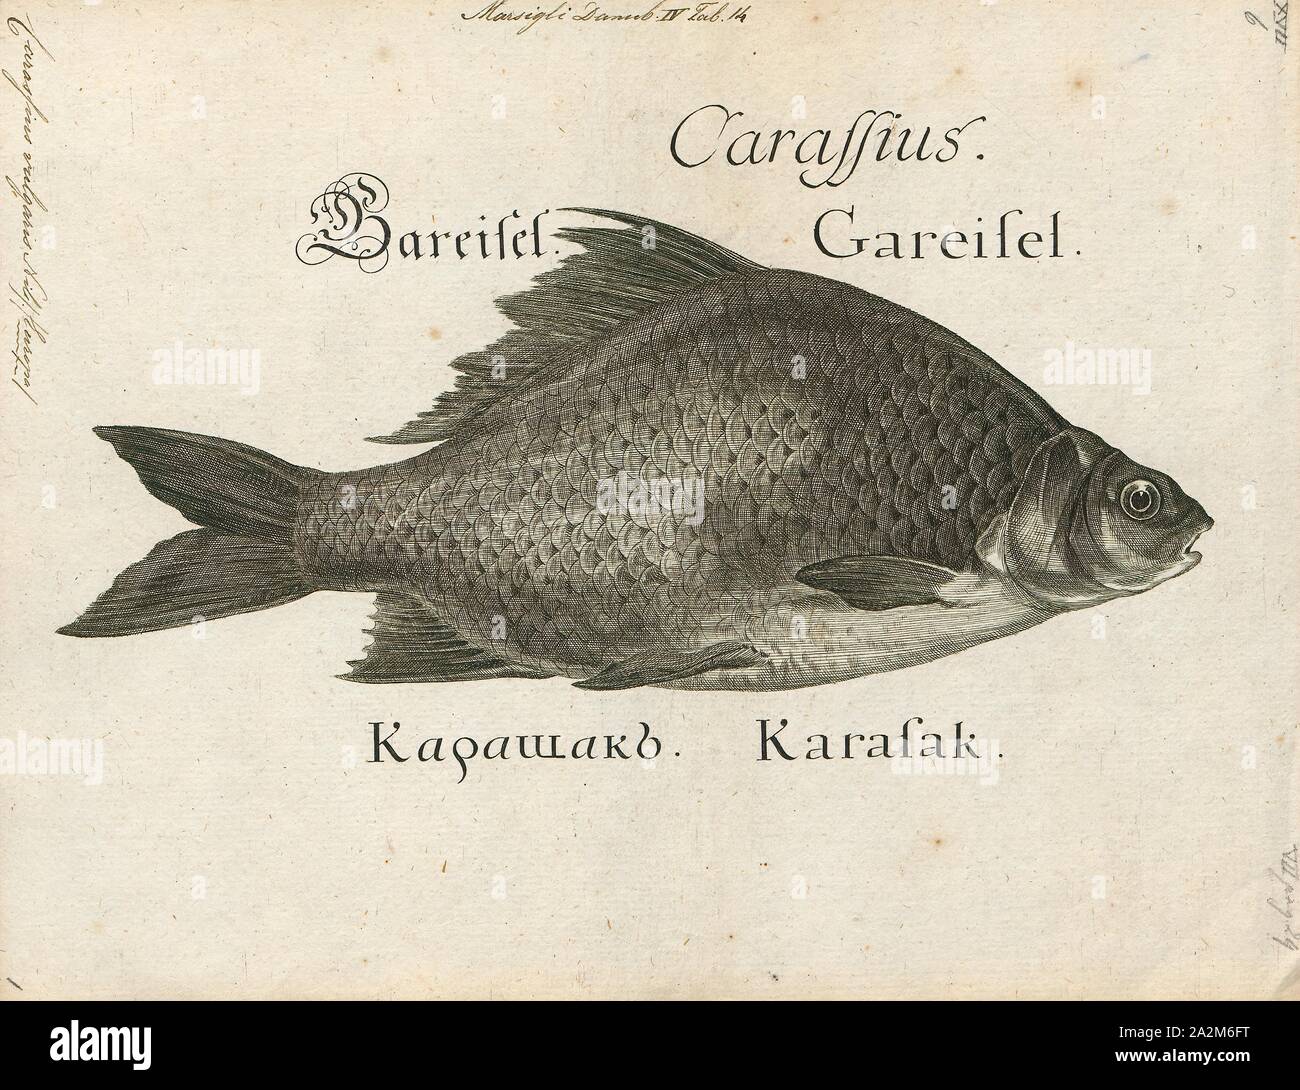 Carassius vulgaris, Print, Carassius is a genus in the ray-finned fish family Cyprinidae. Most species in this genus are commonly known as crucian carps, though this term often specifically refers to C. carassius. The most well known is the goldfish (C. auratus). They have a Eurasian distribution, apparently originating further to the west than the typical carps (Cyprinus), which include the common carp (C. carpio)., 1726 Stock Photo